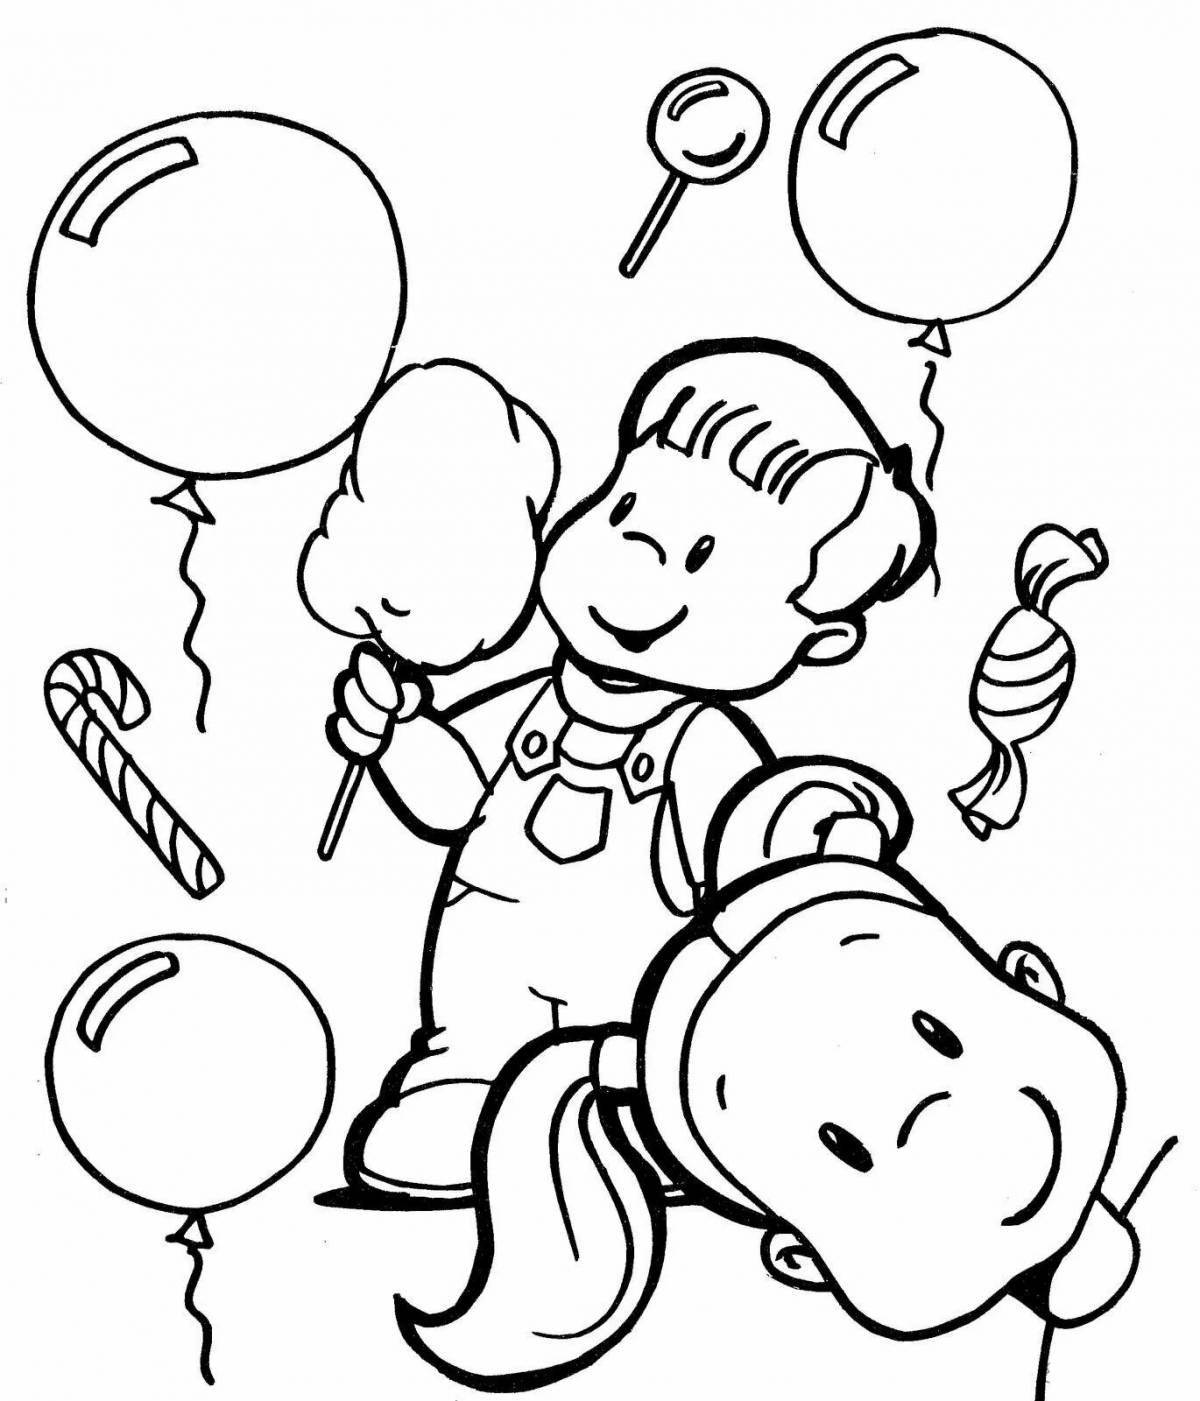 Shining Childhood Coloring Page